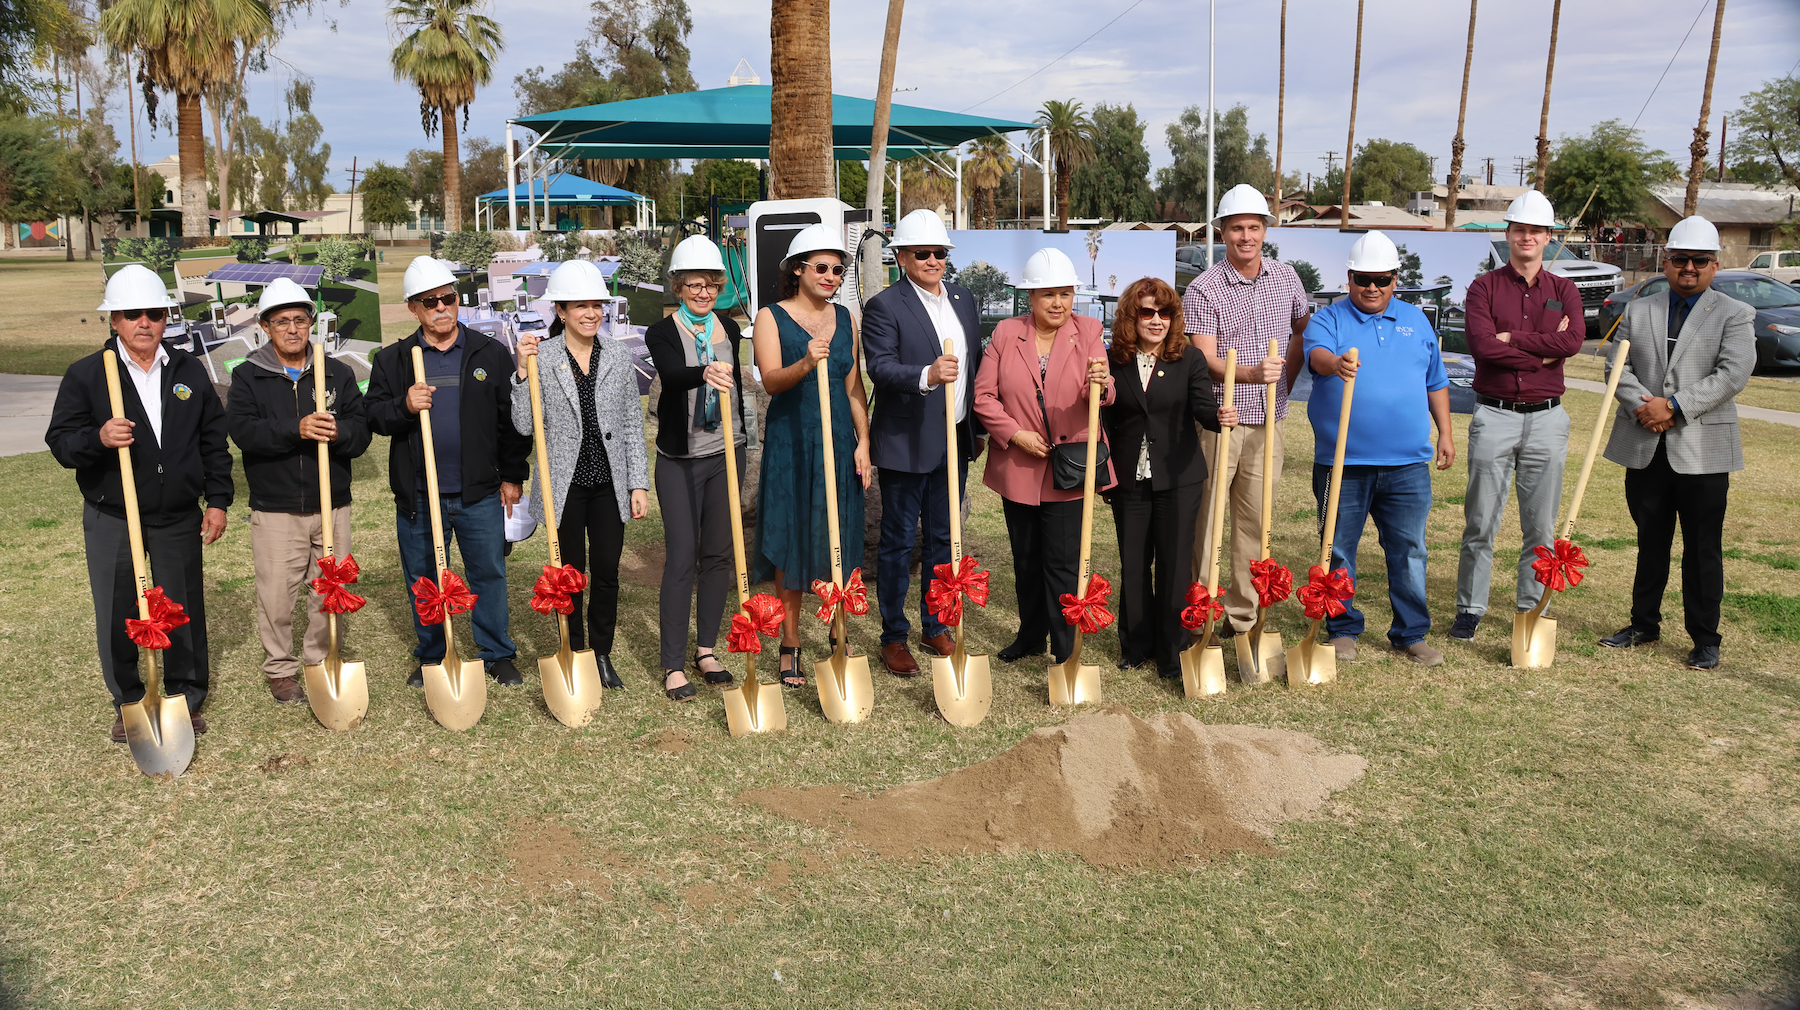 13 people standing in a line holding shovels at a groundbreaking event. 